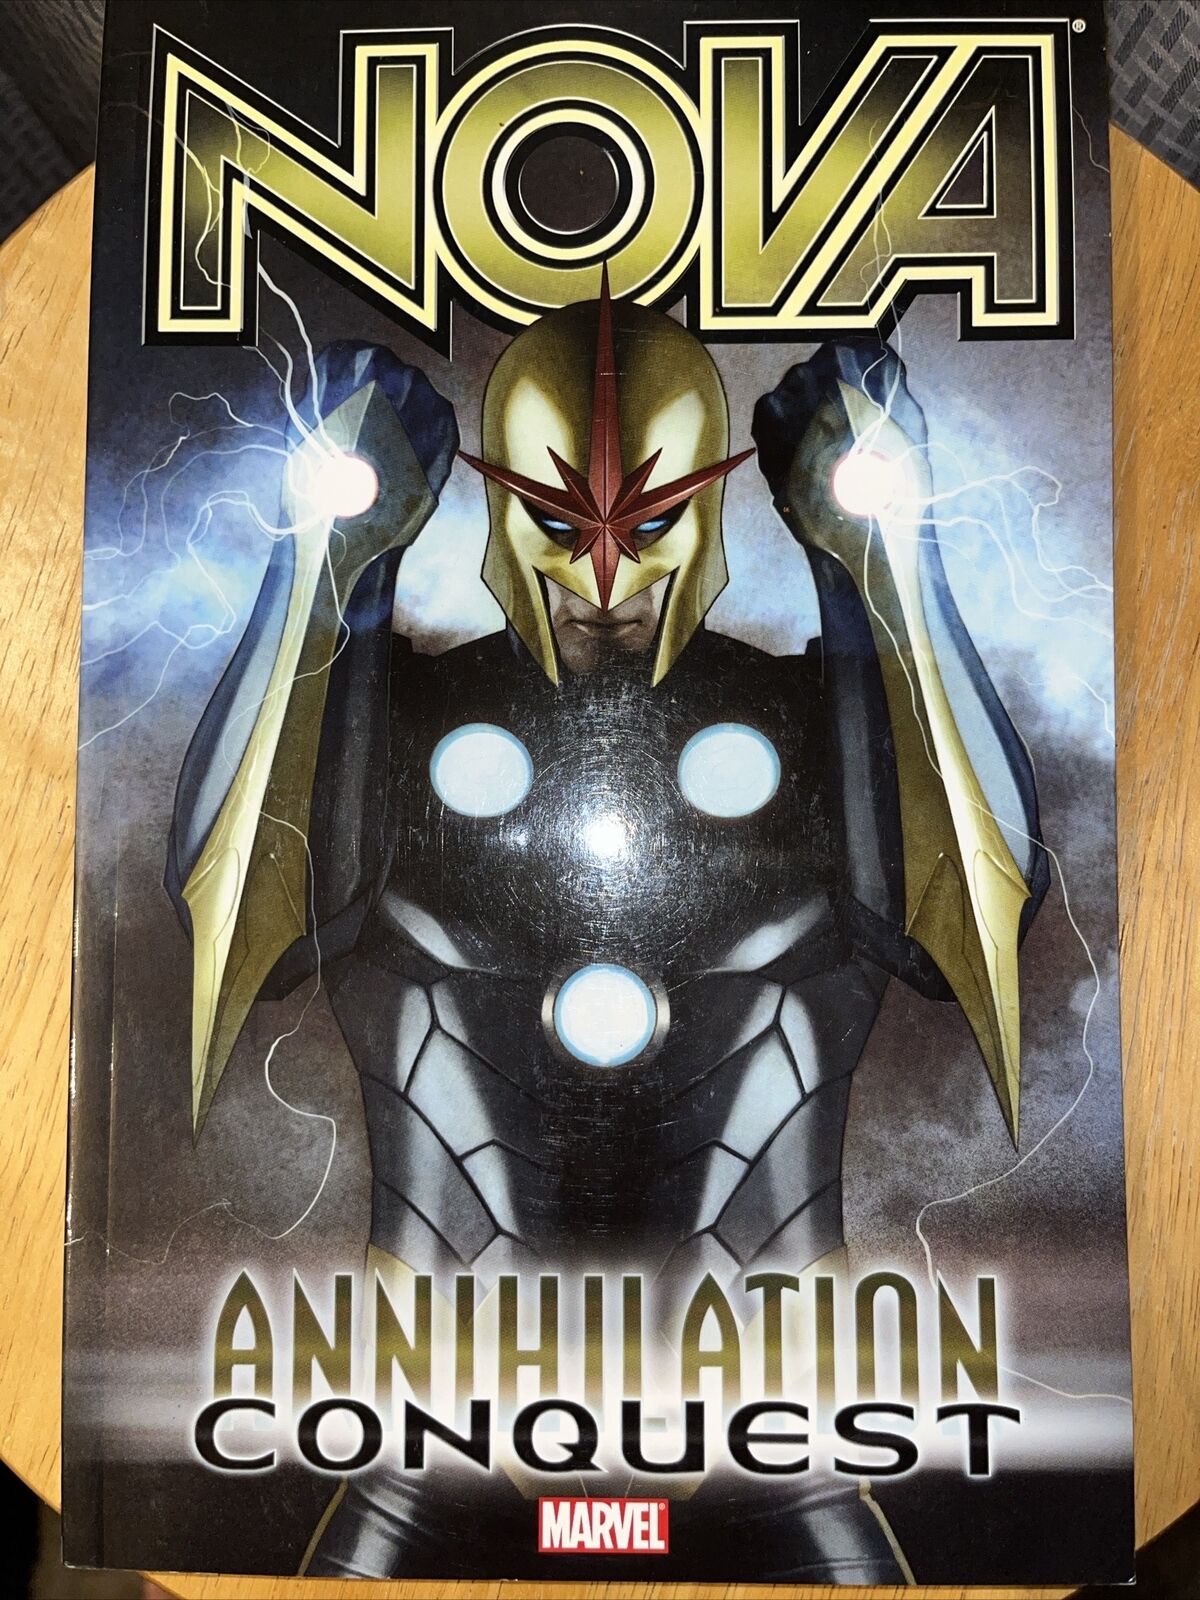 Nova, Vol. 1: Annihilation - Conquest by Andy Lanning PB First Edition